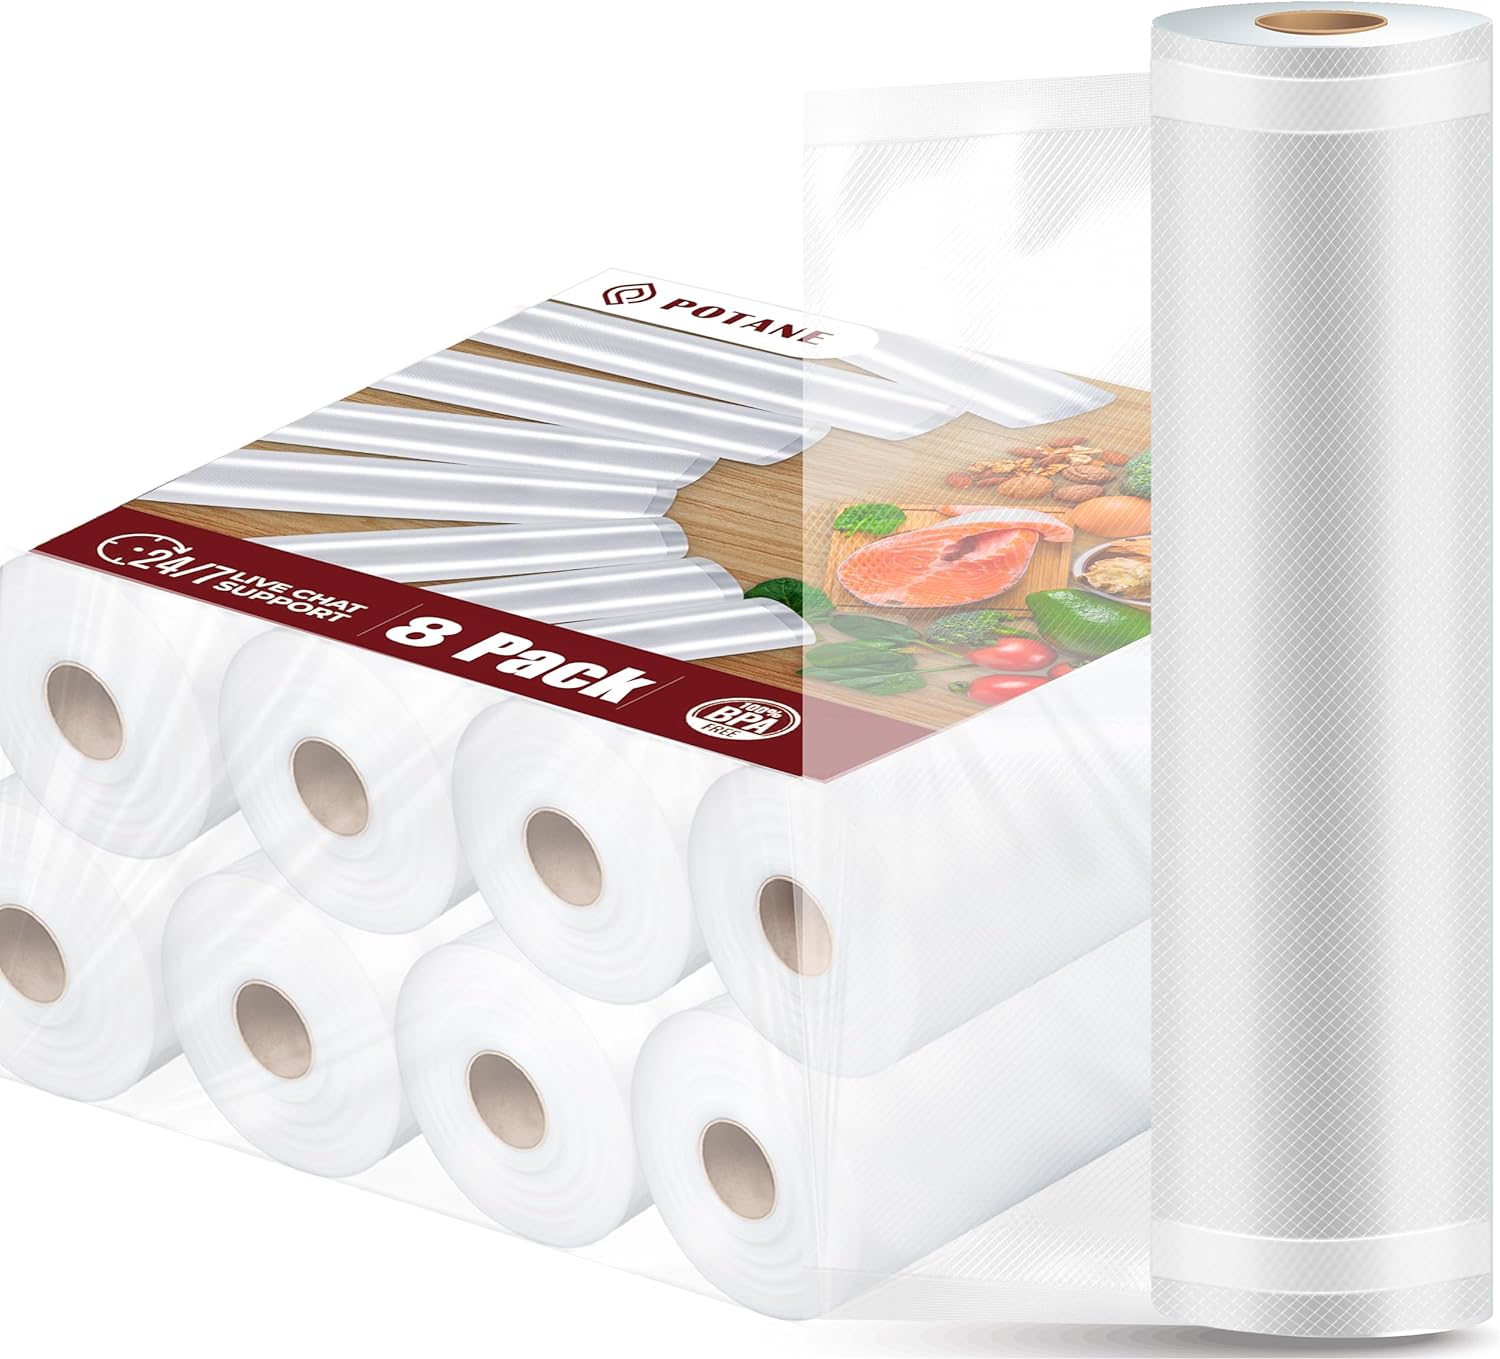  Potane Precision Vacuum Machine,Pro Food Sealer with Built-in  Cutter and Bag Storage(Up to 20 Feet Length), Both Auto&Manual Options,2  Modes,Includes 2 Bag Rolls 11”x16' and 8”x16',Compact Design: Home & Kitchen